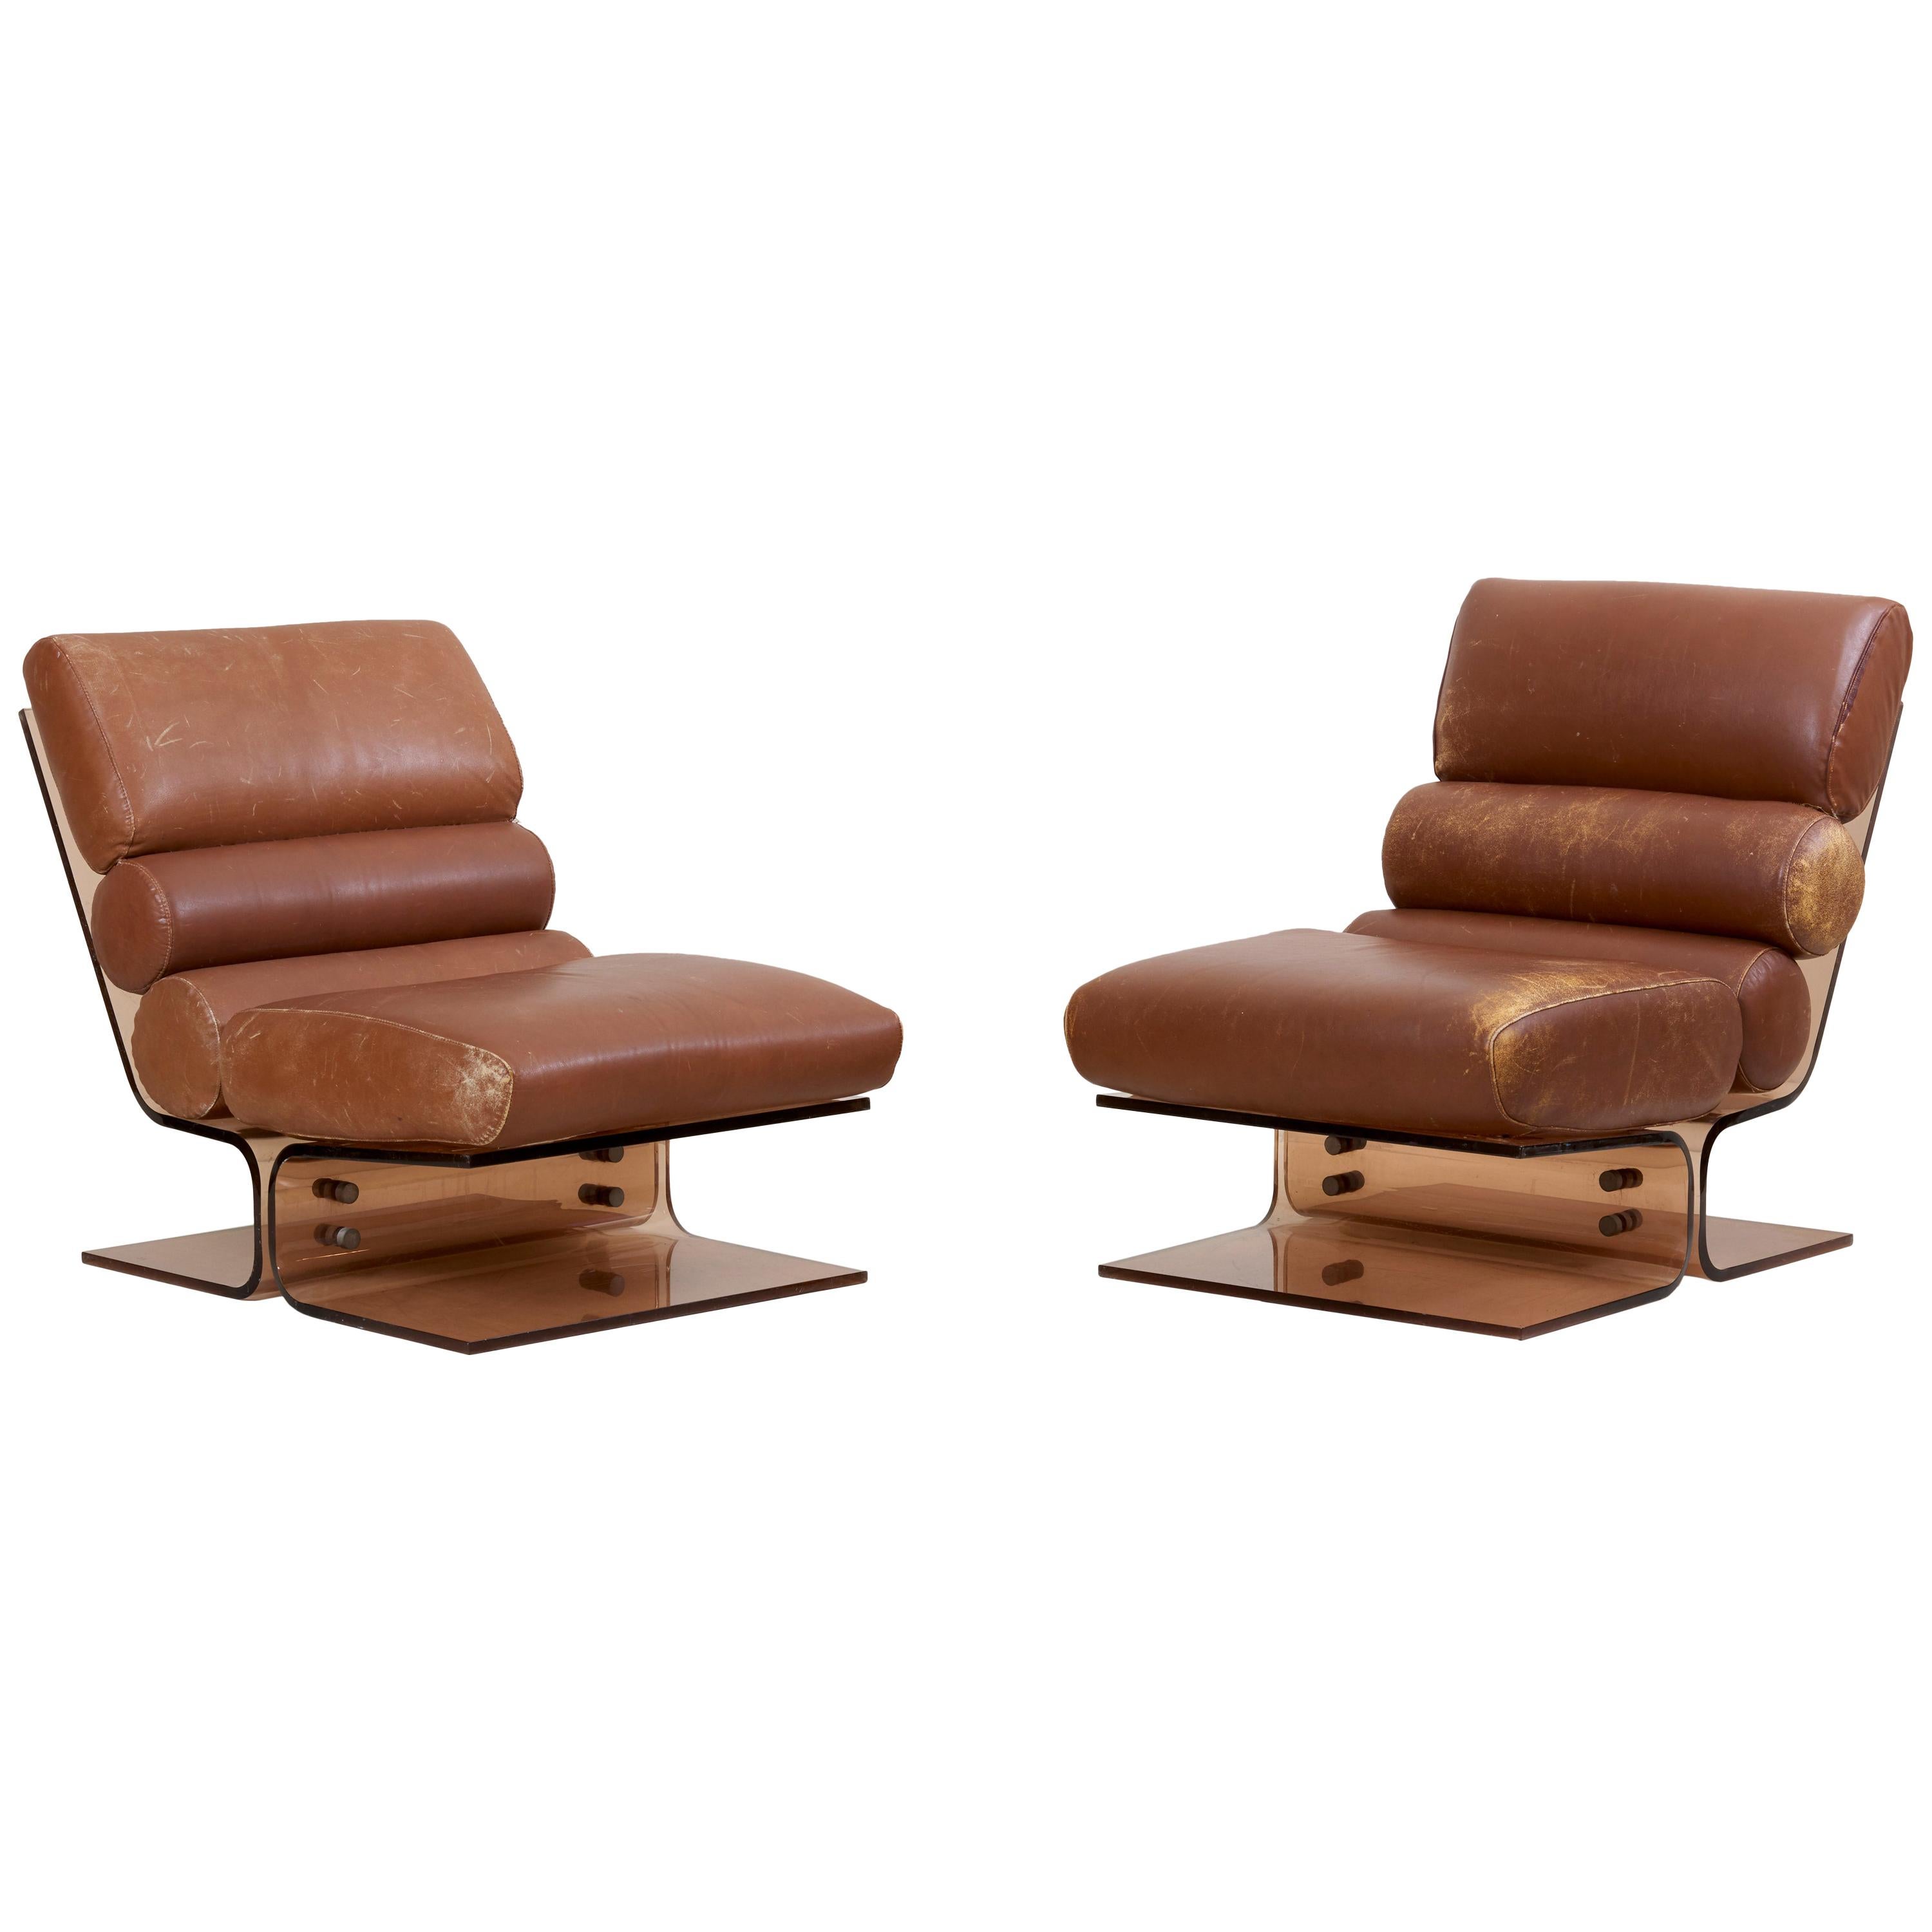 Pair of Space Age Lounge Chairs in Lucite and Leather, 1960s